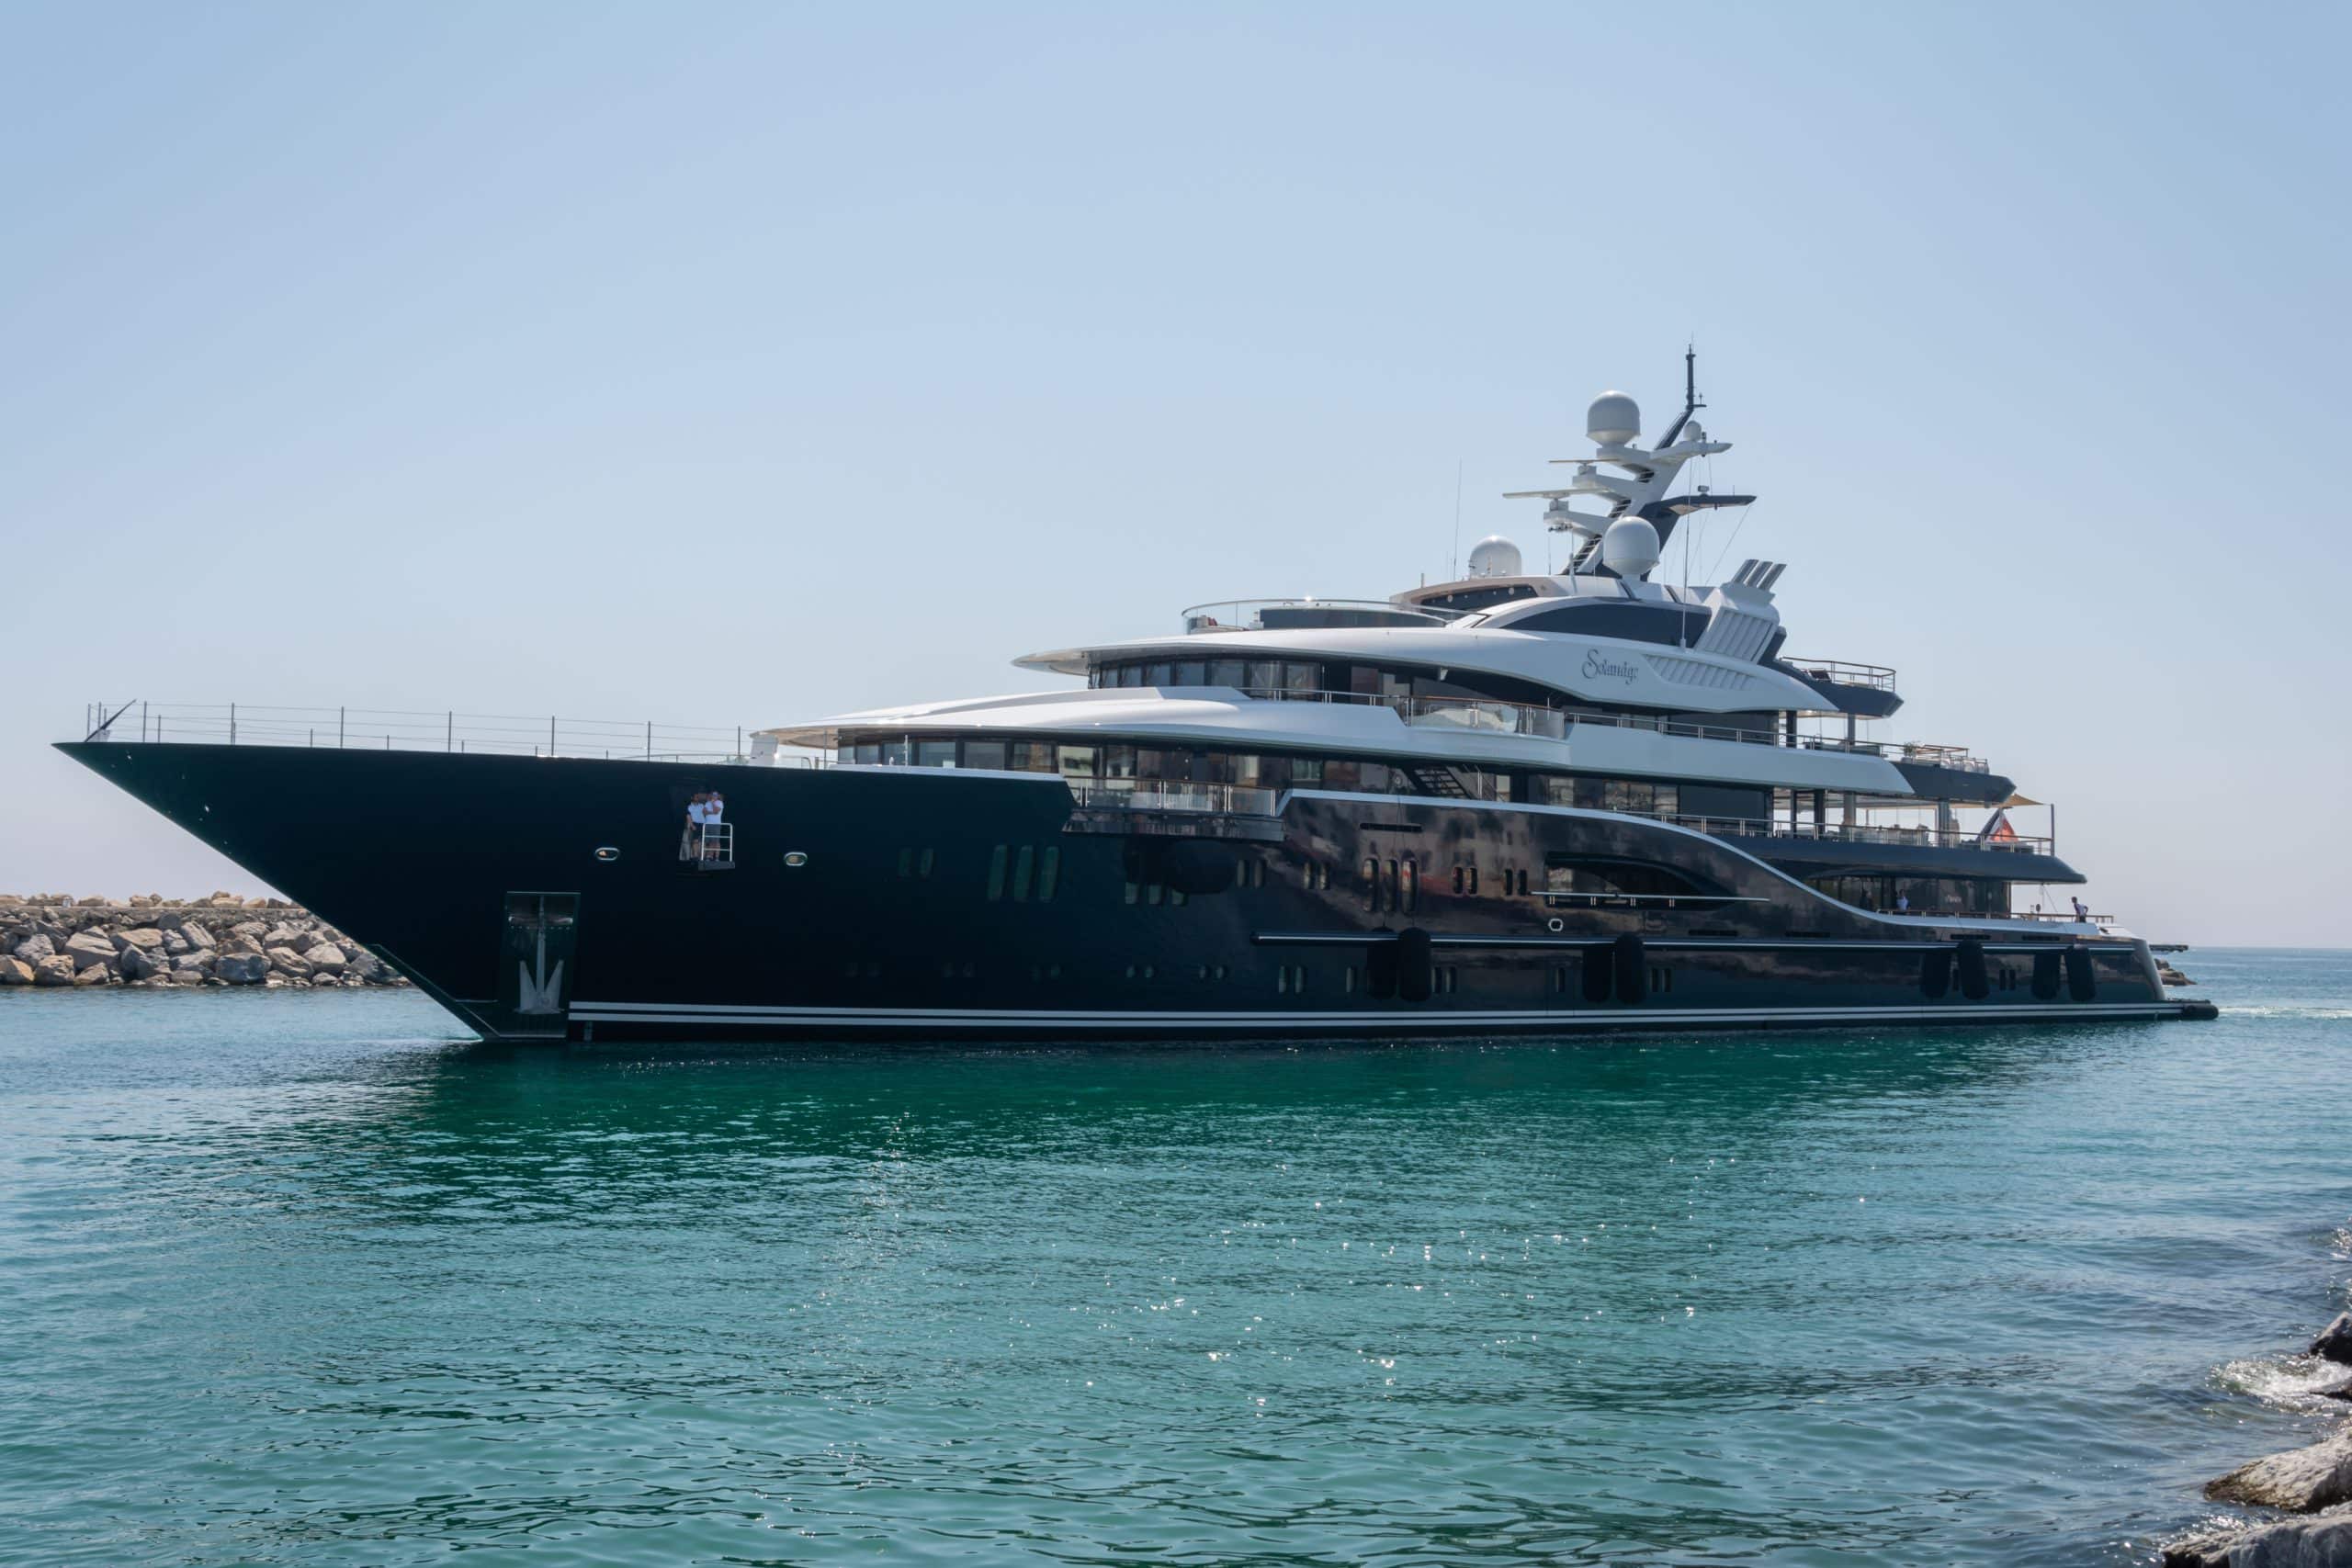 A picture of one of the most expensive yachts in the world, the iconic Lürssen Octopus superyacht.